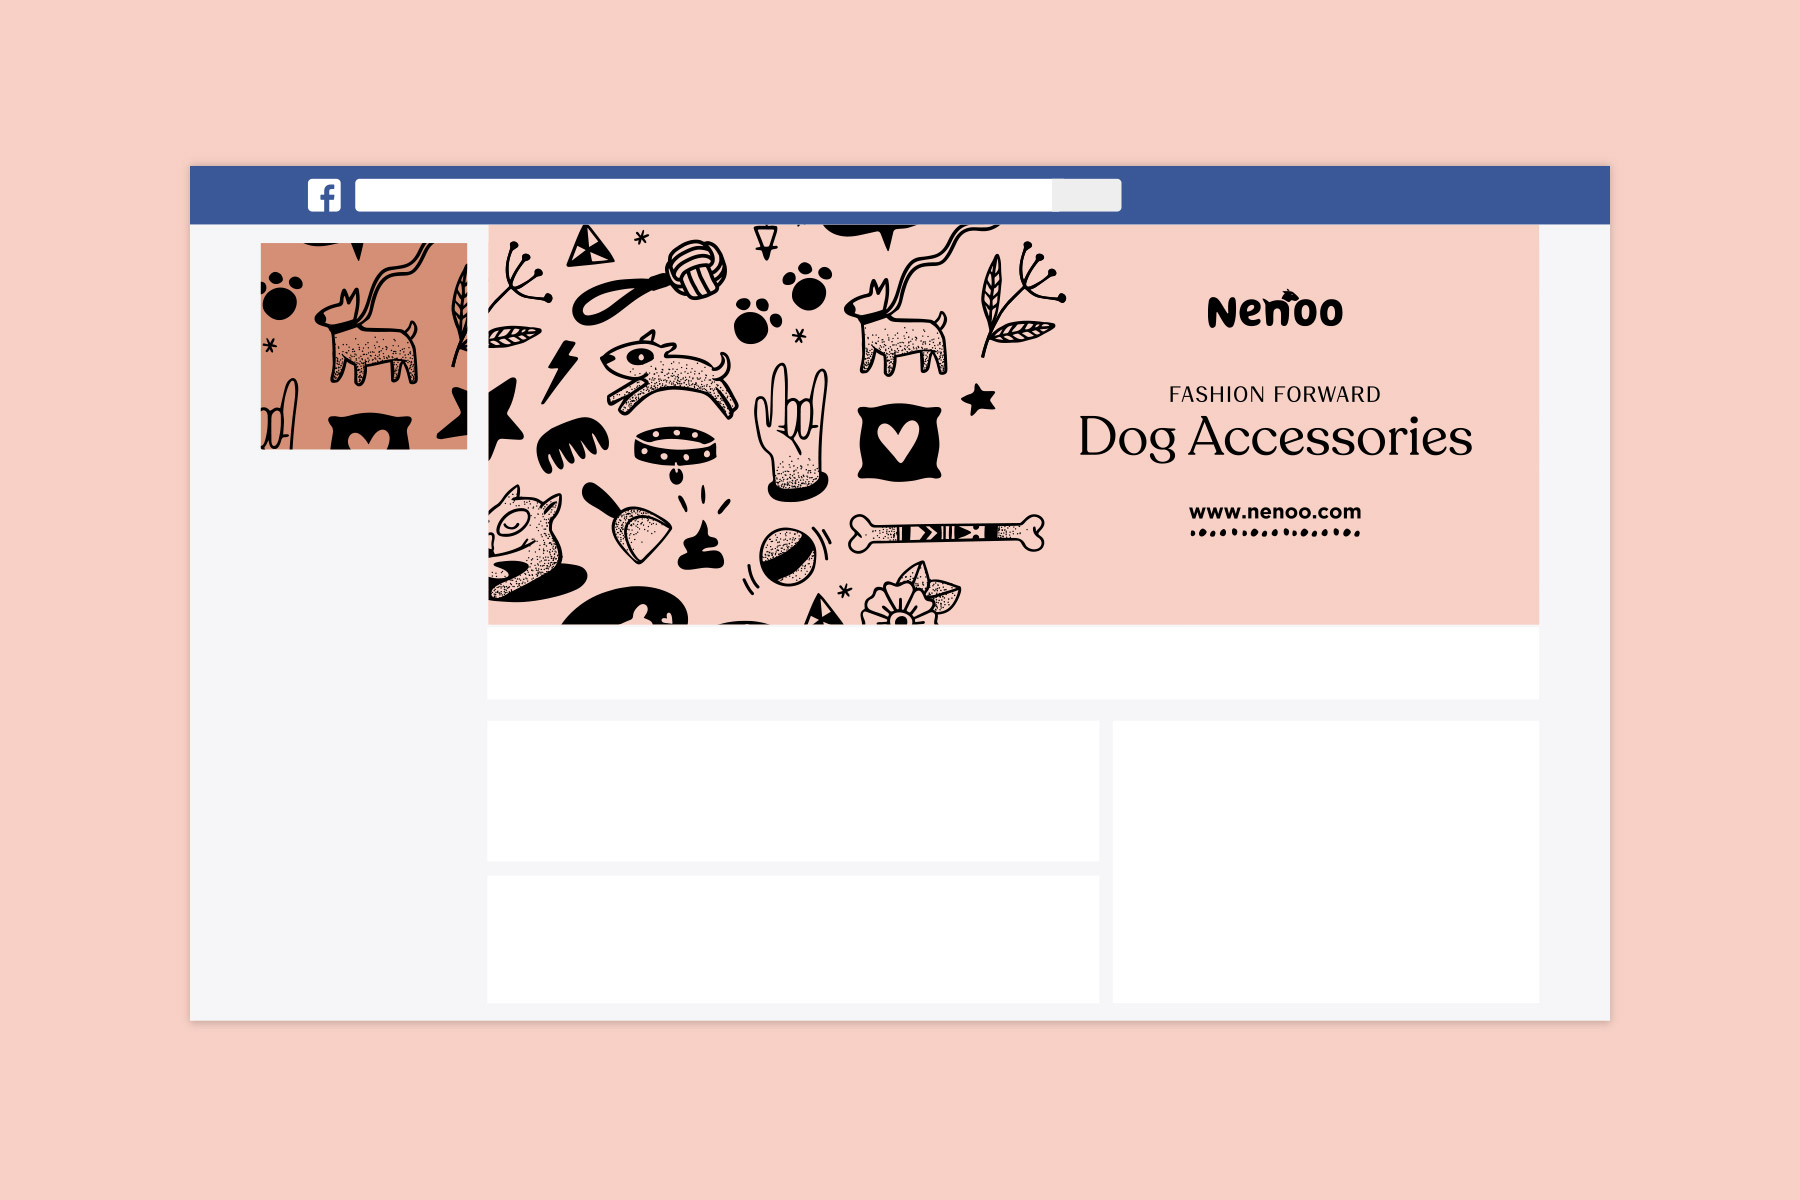 Facebook banner for dog accessories company